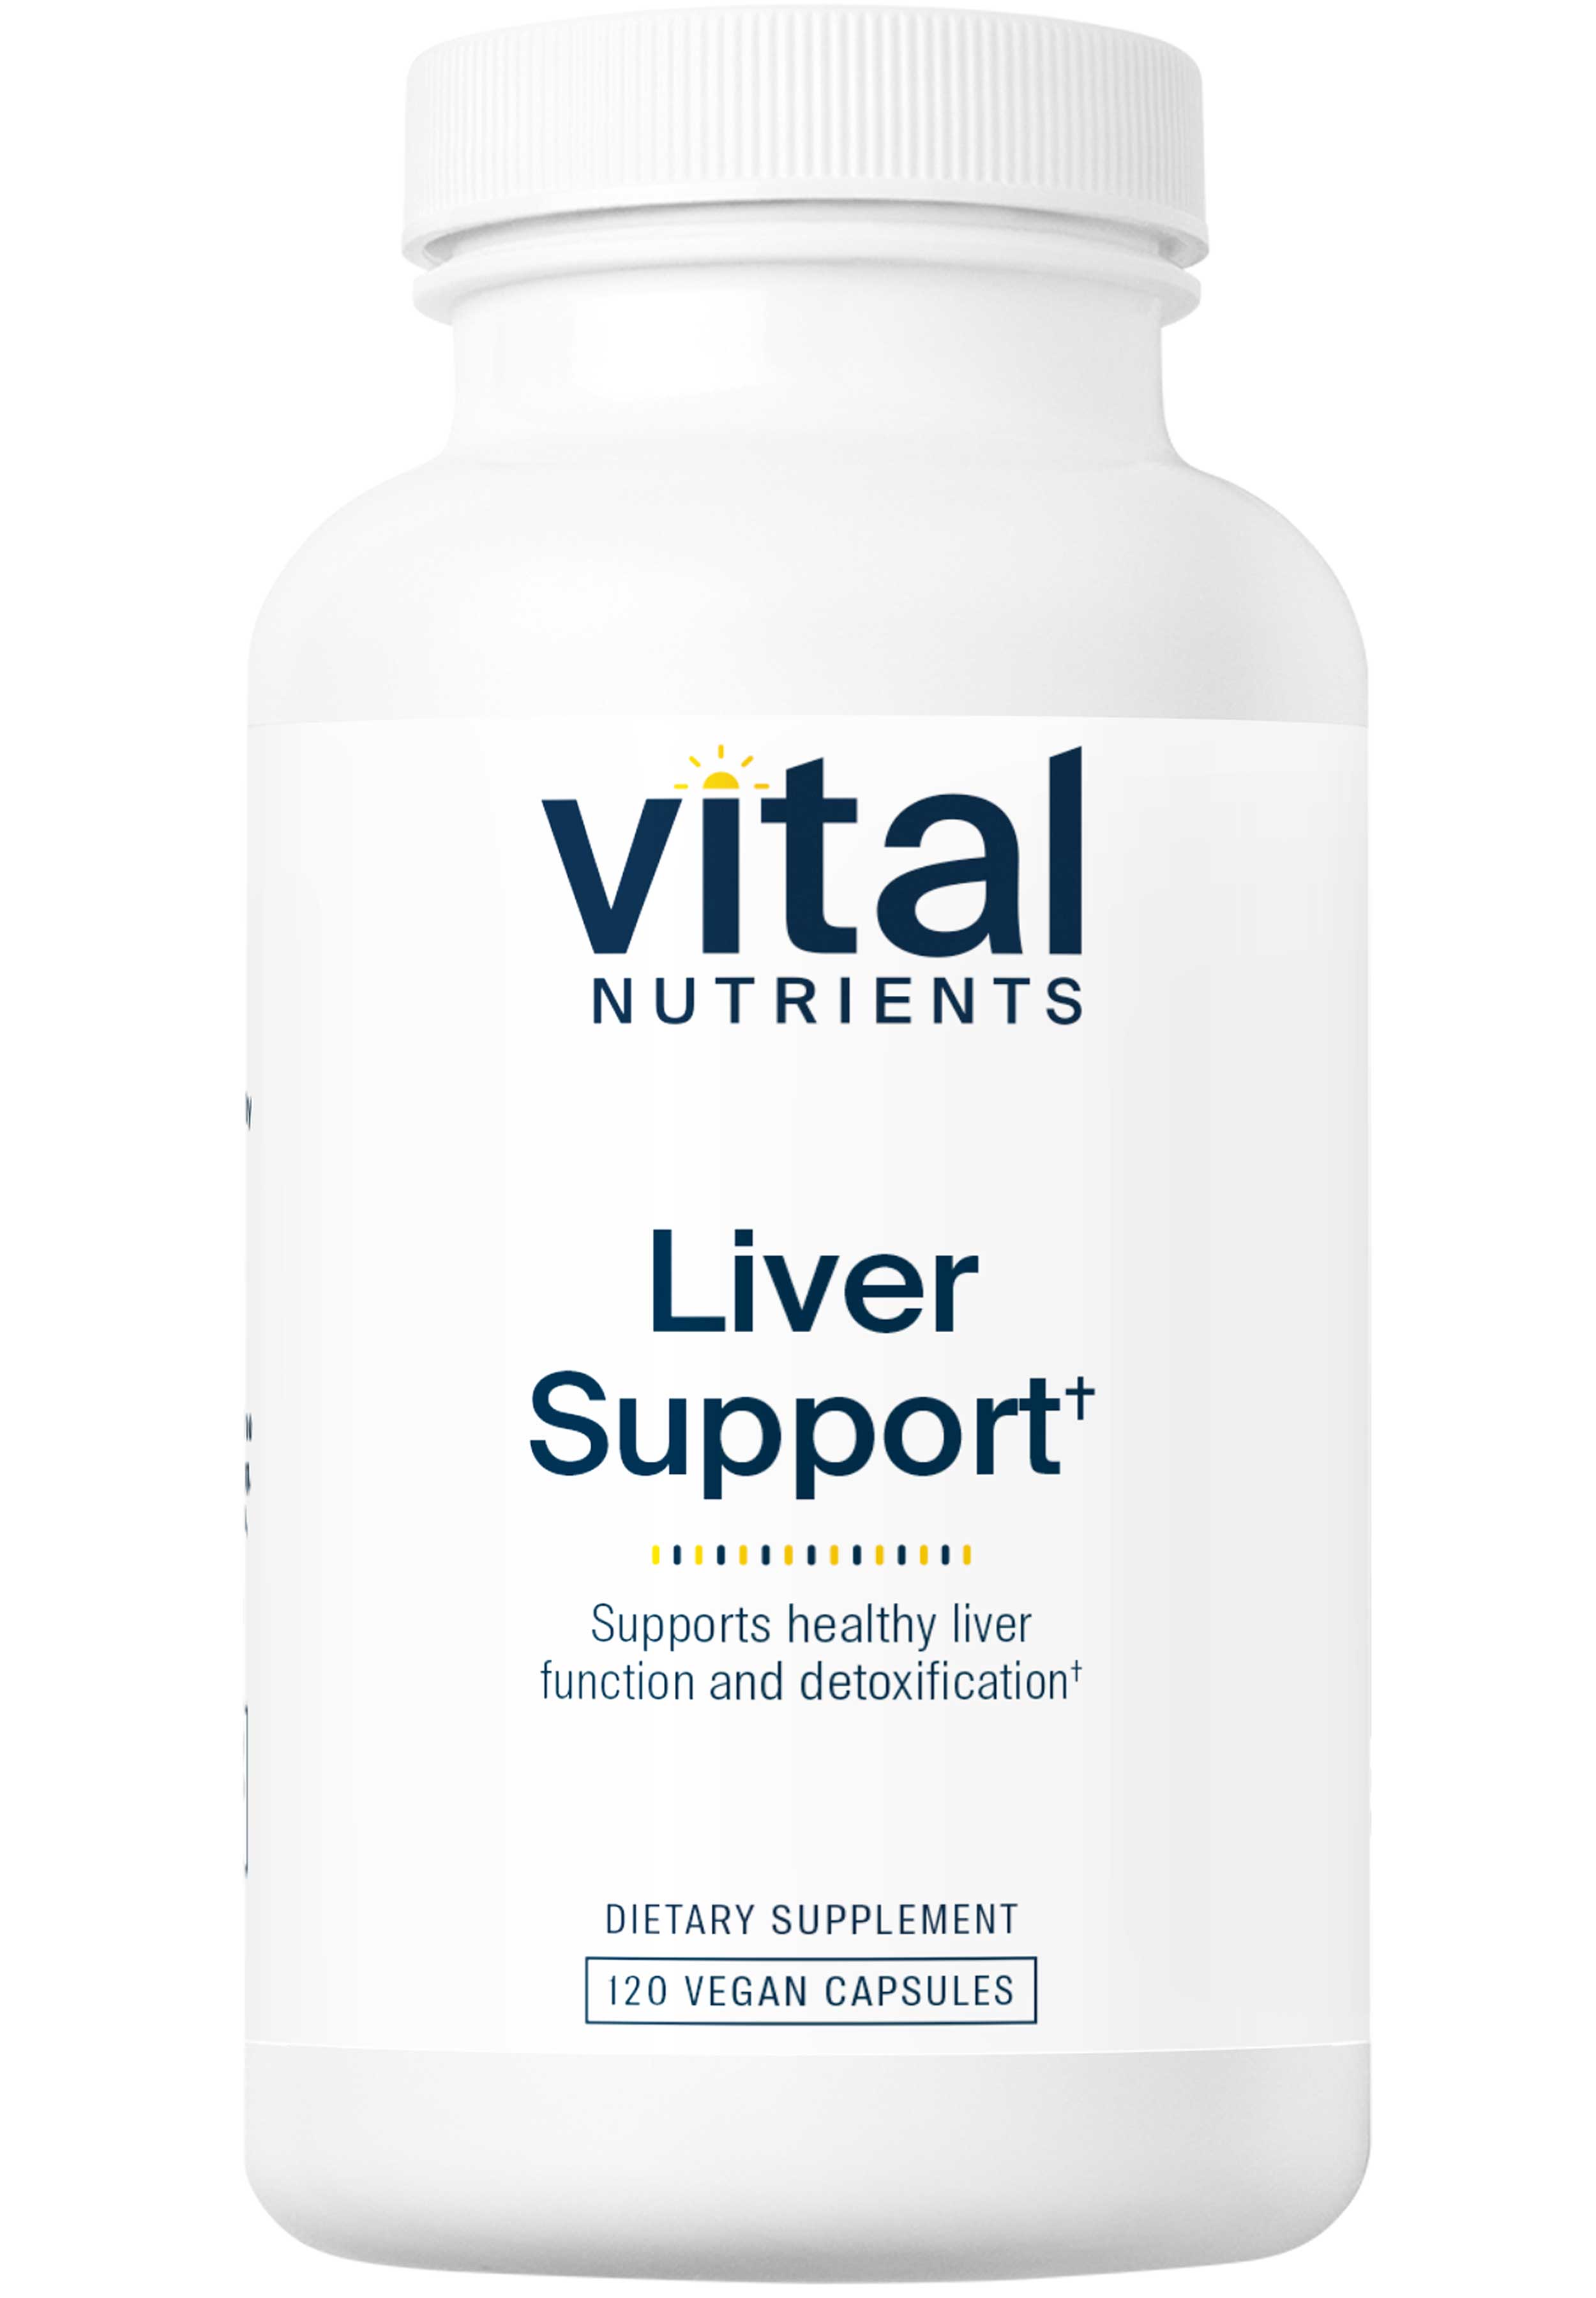 Vital Nutrients Liver Support